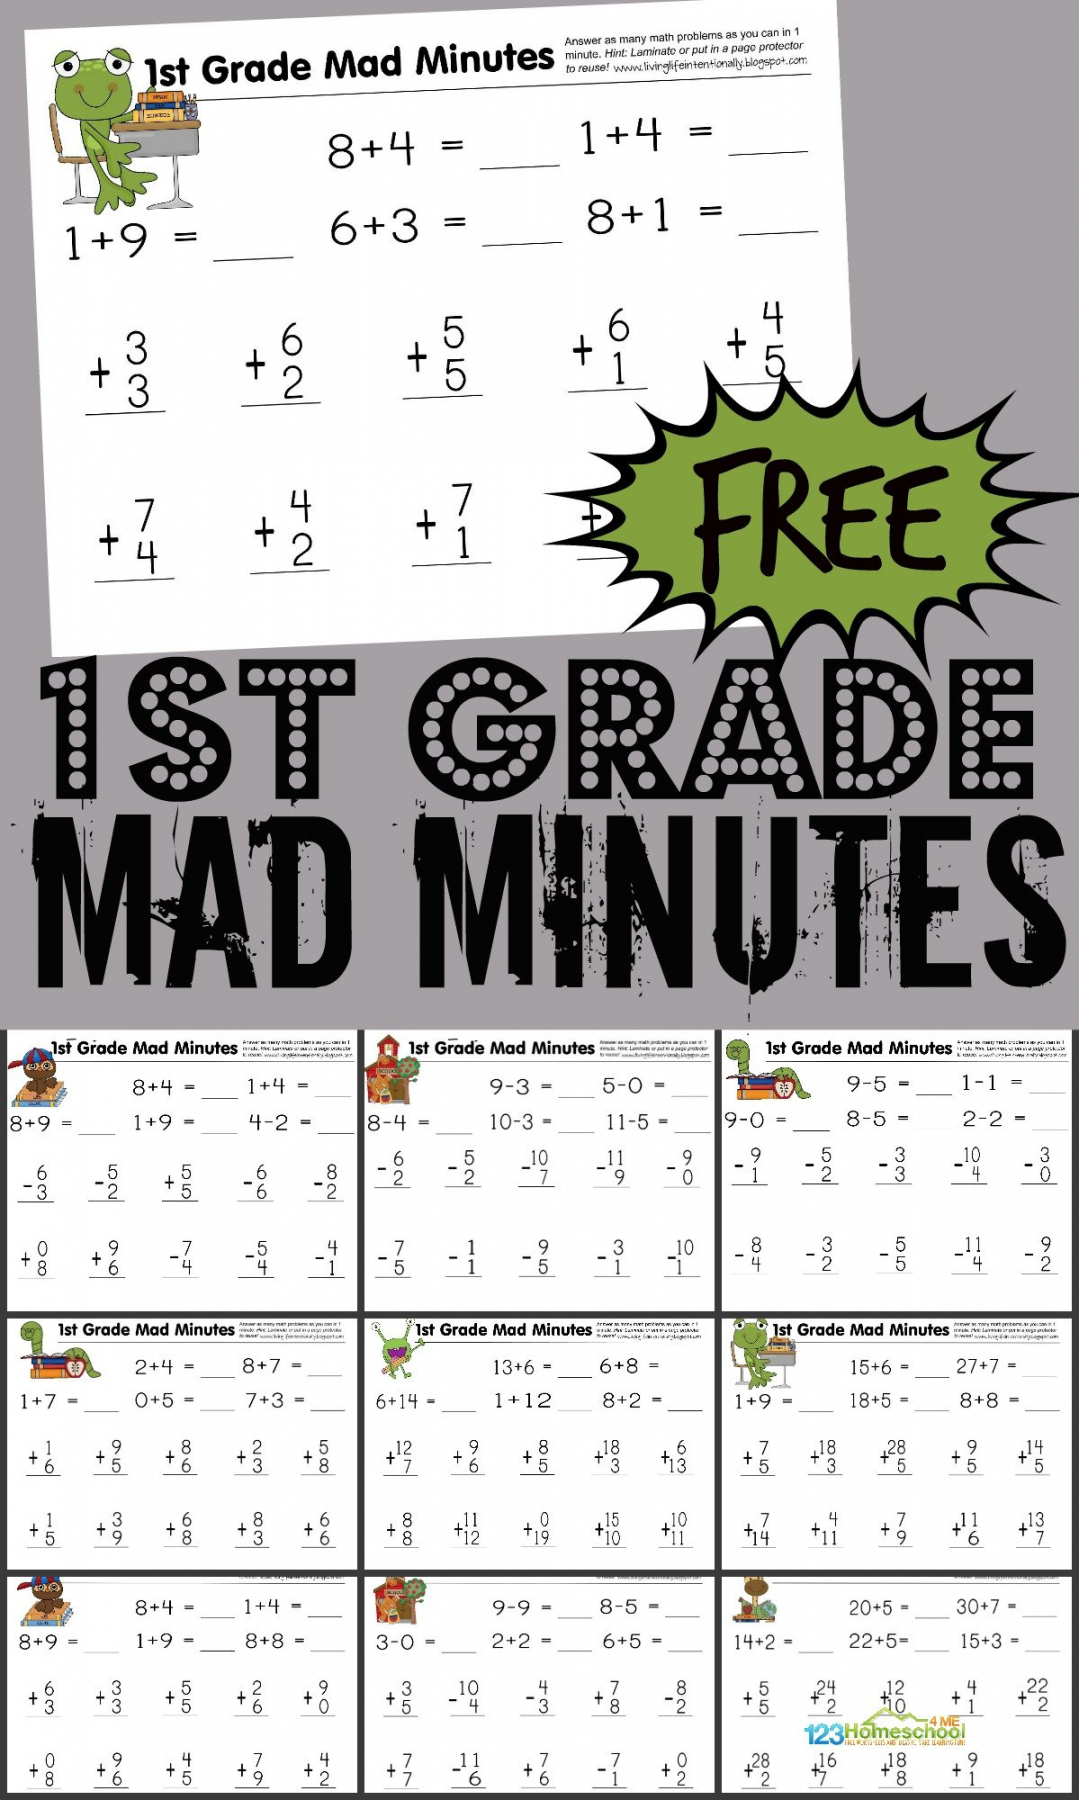 Free Printable Math Worksheets For 1st Graders - Printable - FREE st Grade Printable Math Worksheets & First Grade Mad Minutes!